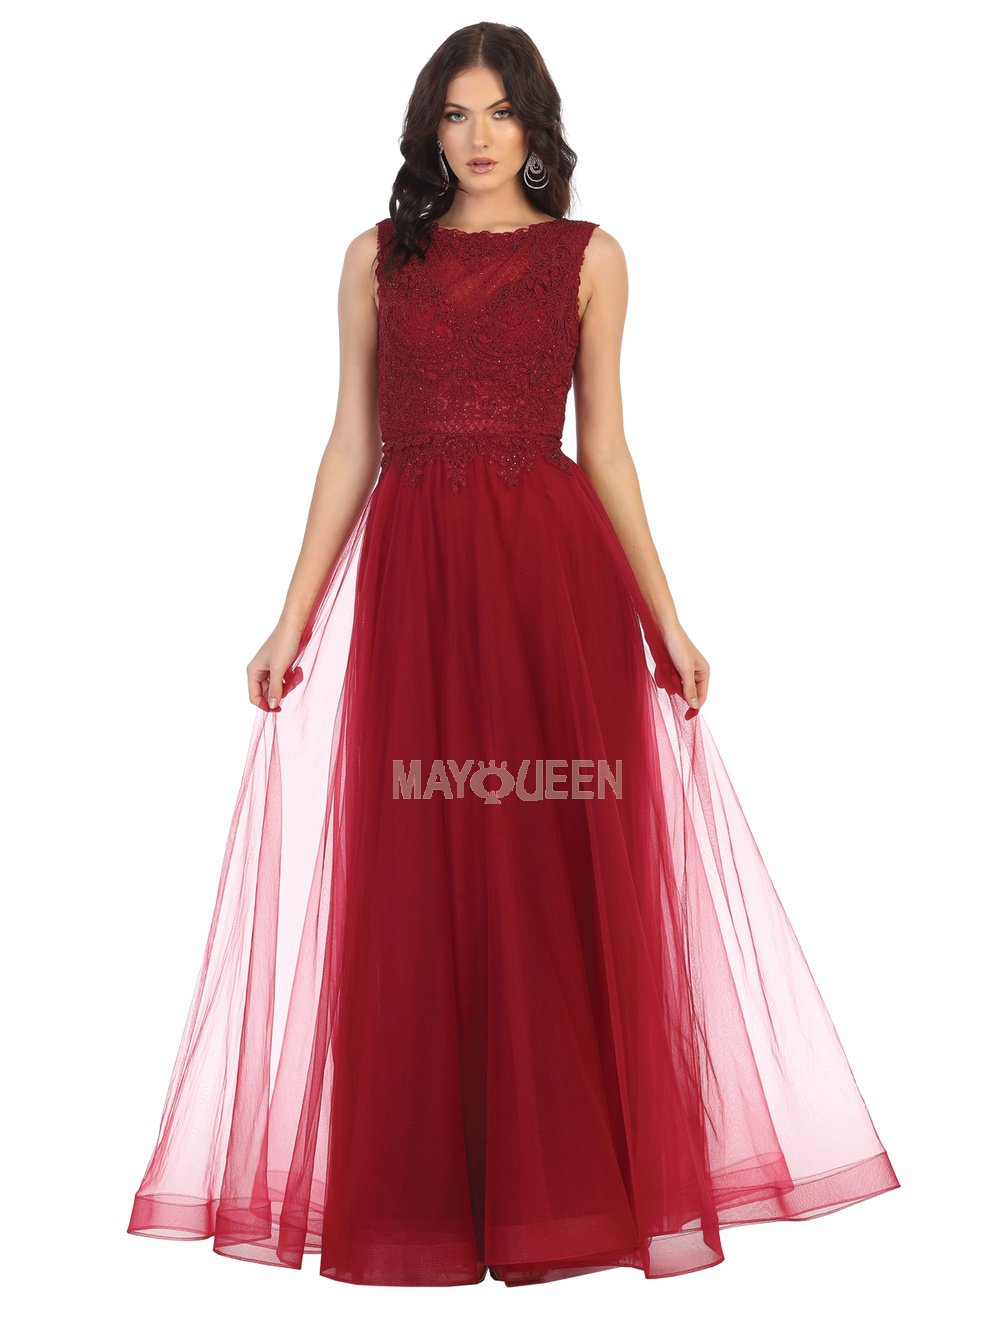 May Queen - MQ1717 Sheer Lattice Rendered Tulle Dress In Red